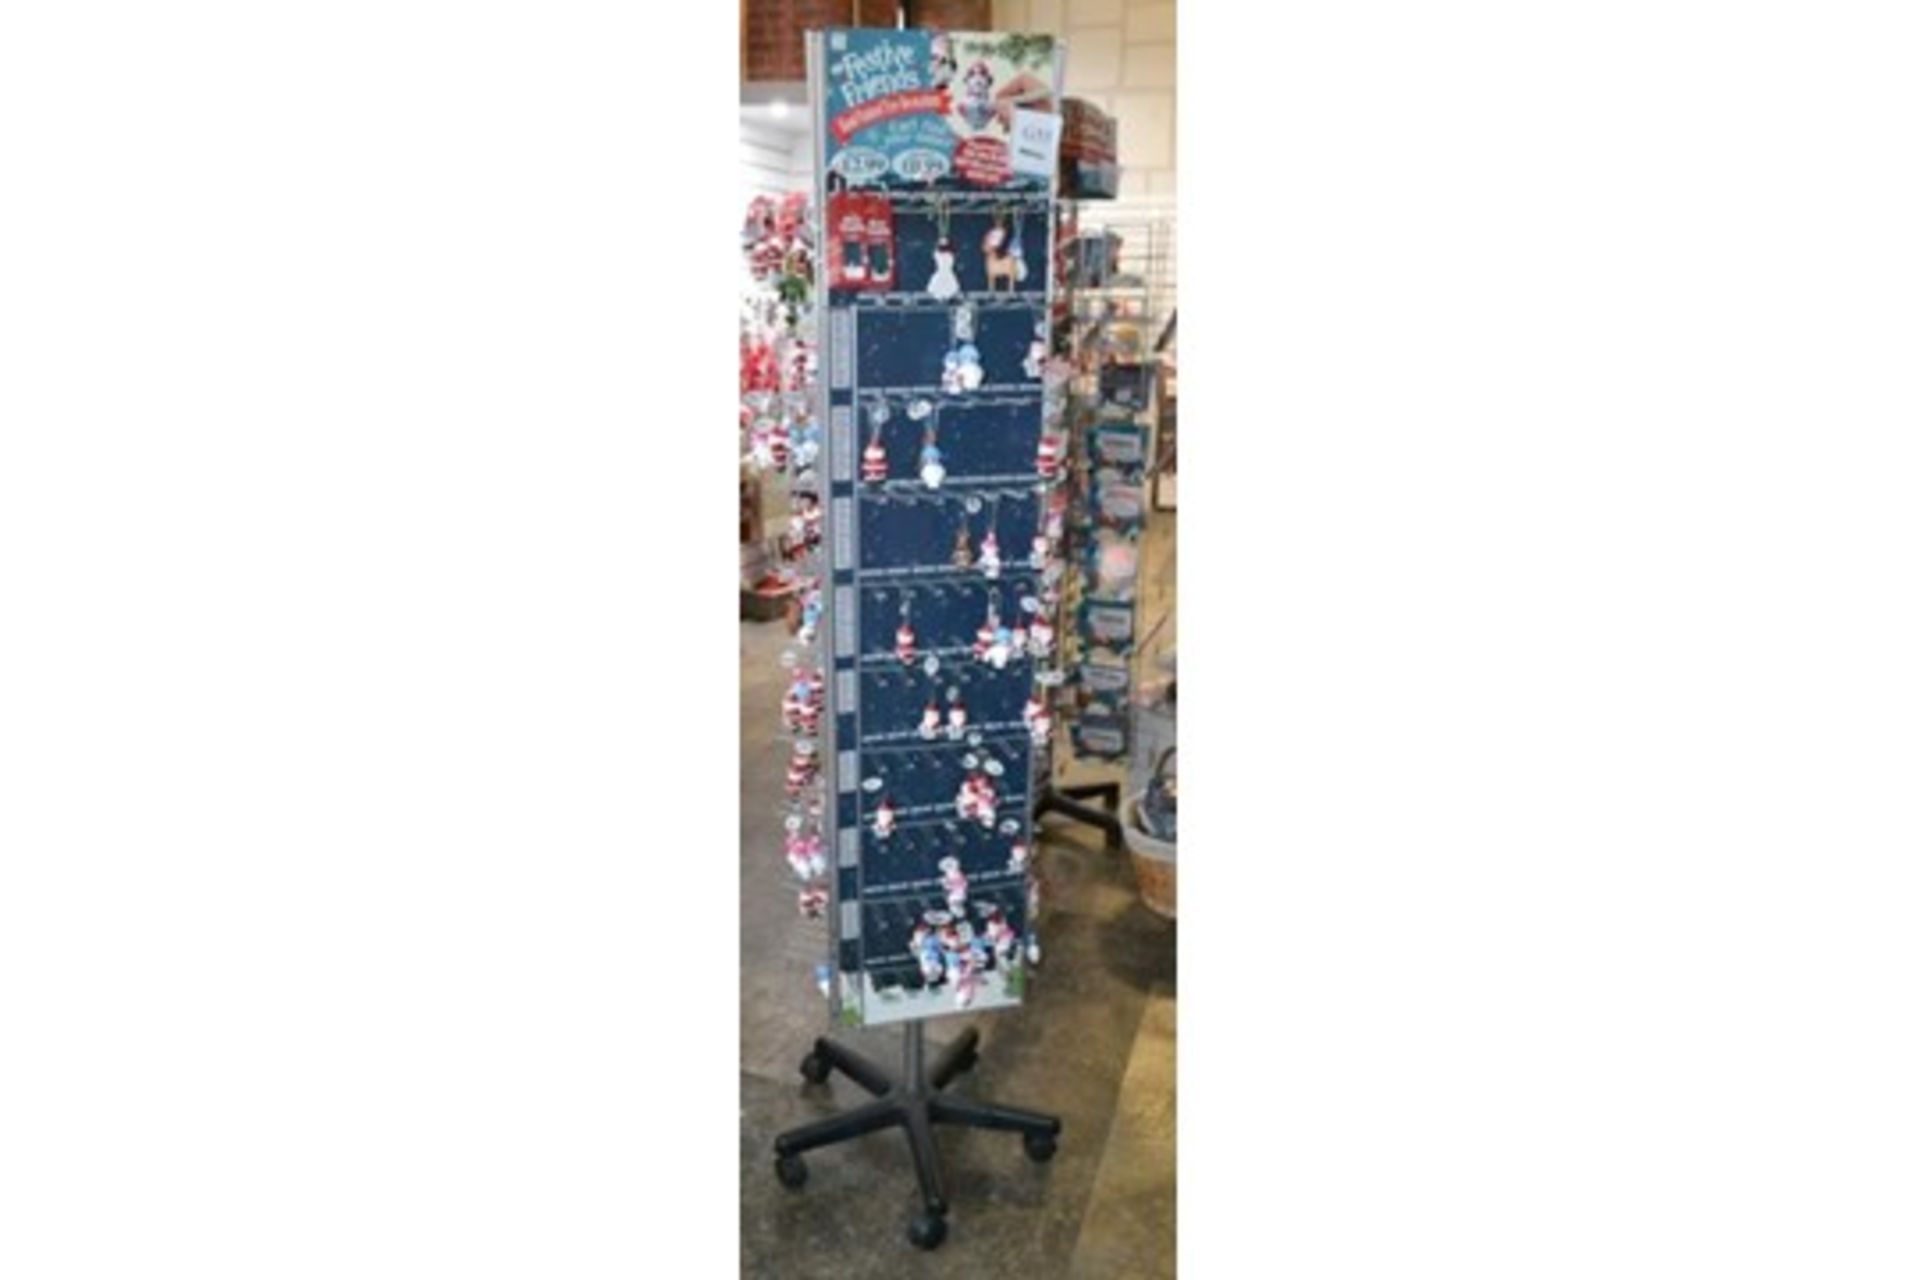 27 x Retail Carousel Display Stands With Approximately 2,800 Items of Resale Stock - Includes - Image 55 of 61